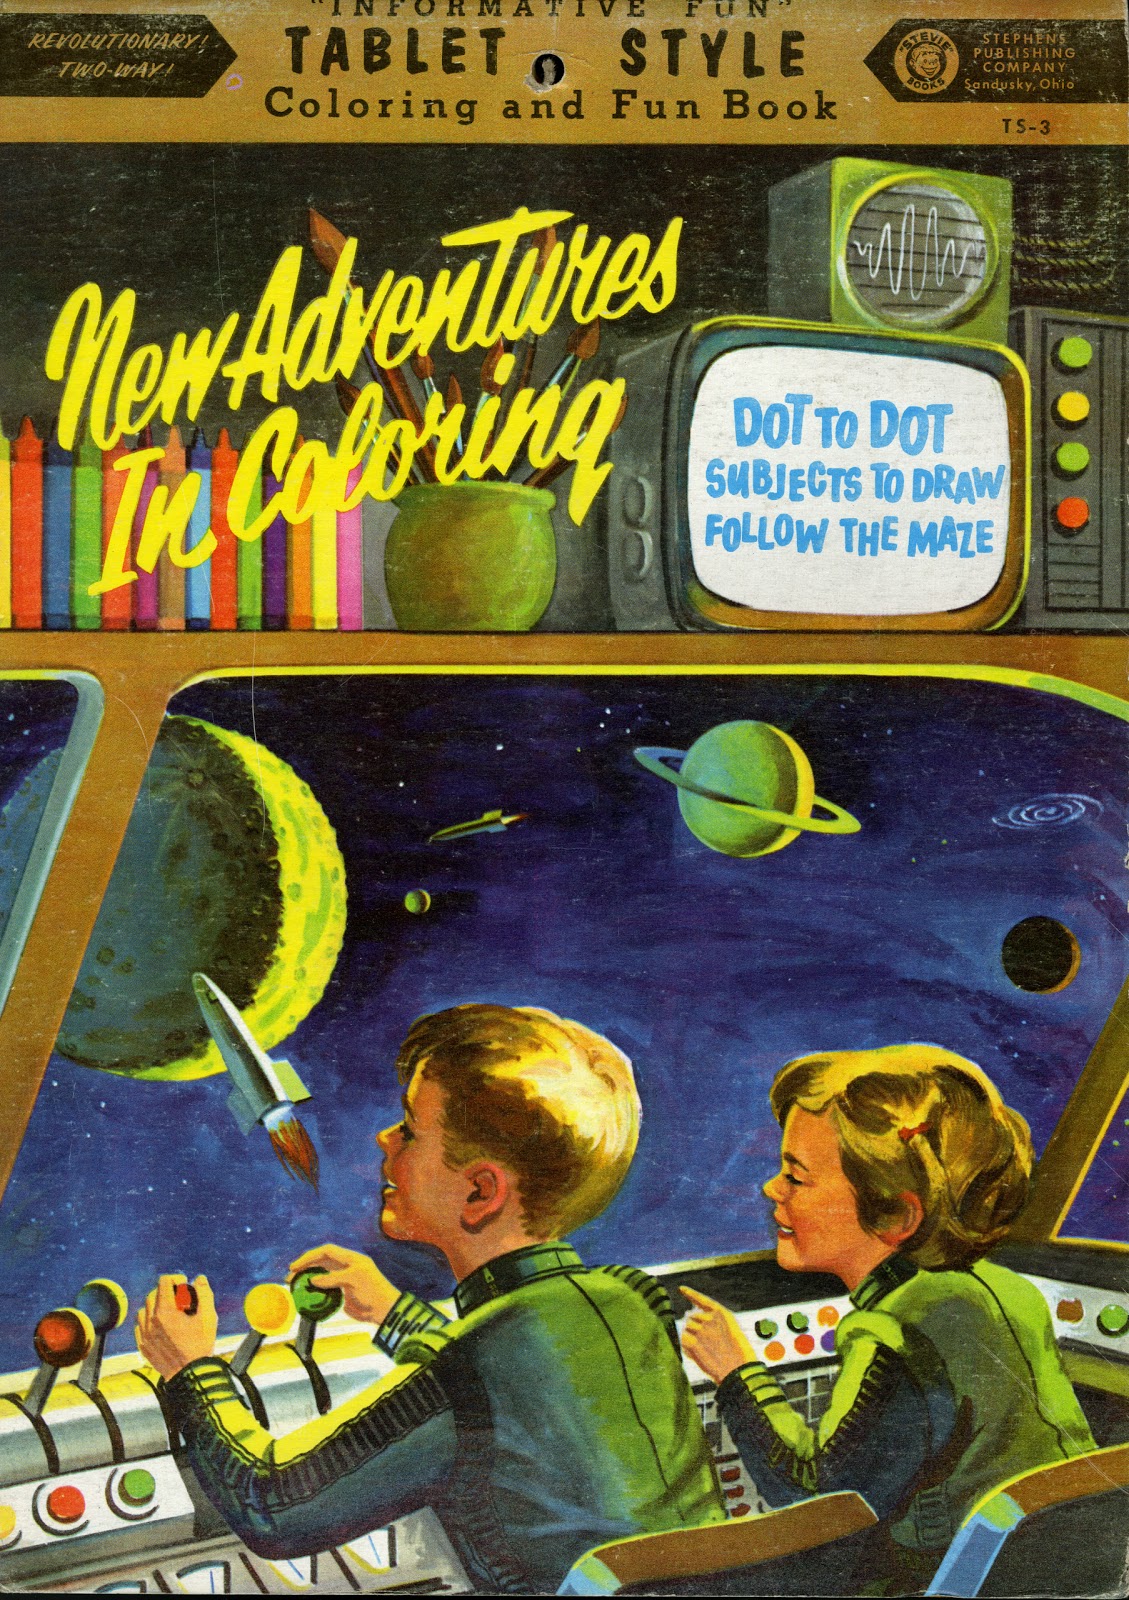 Dreams of Space - Books and Ephemera: New Adventures in Coloring (1959)